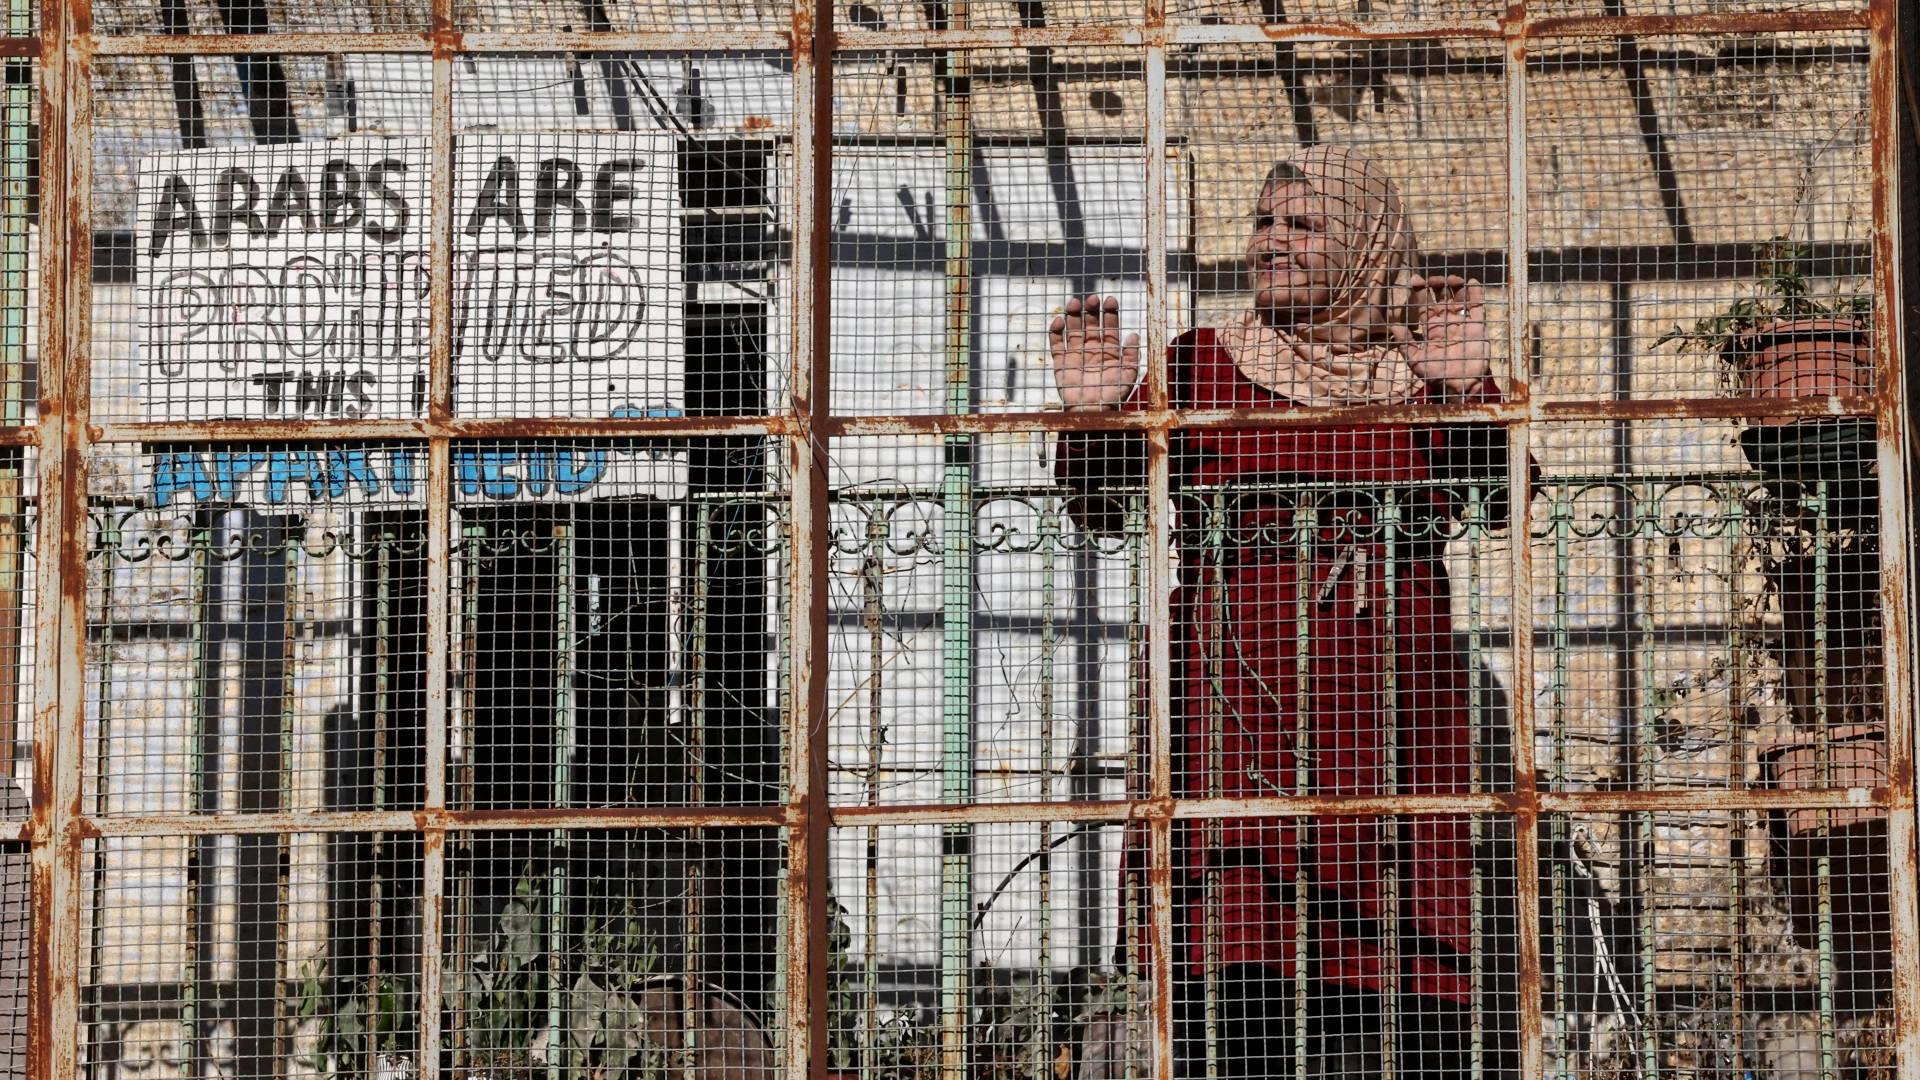 A Palestinian woman stands at a fence separating Jewish settlers from Palestinians in Hebron